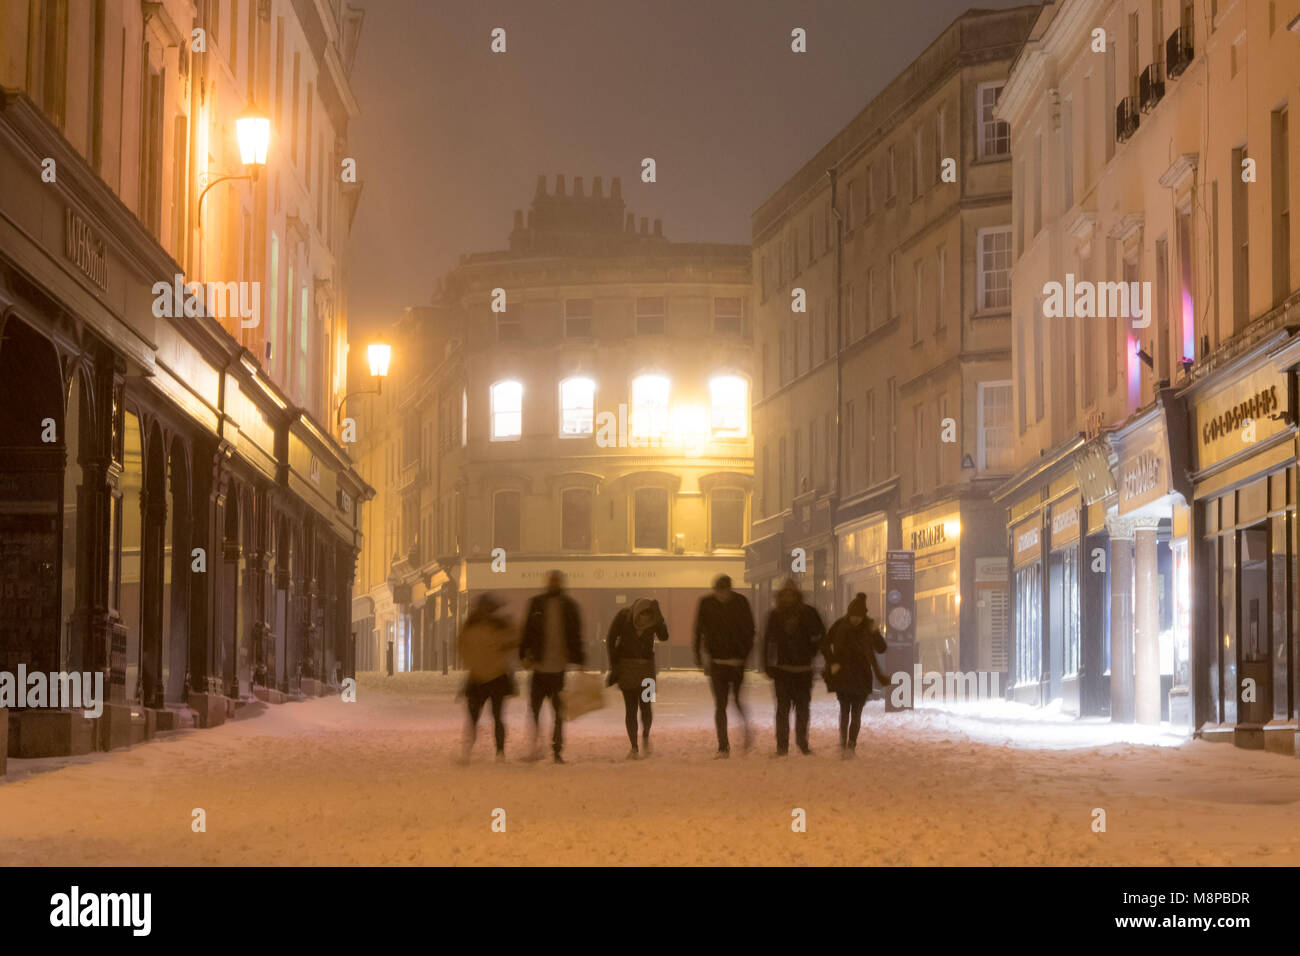 BATH, UK - MARCH 01 2018 The High Street at night in snow, with people walking. Shopping and eating area in UNESCO World Heritage city Stock Photo